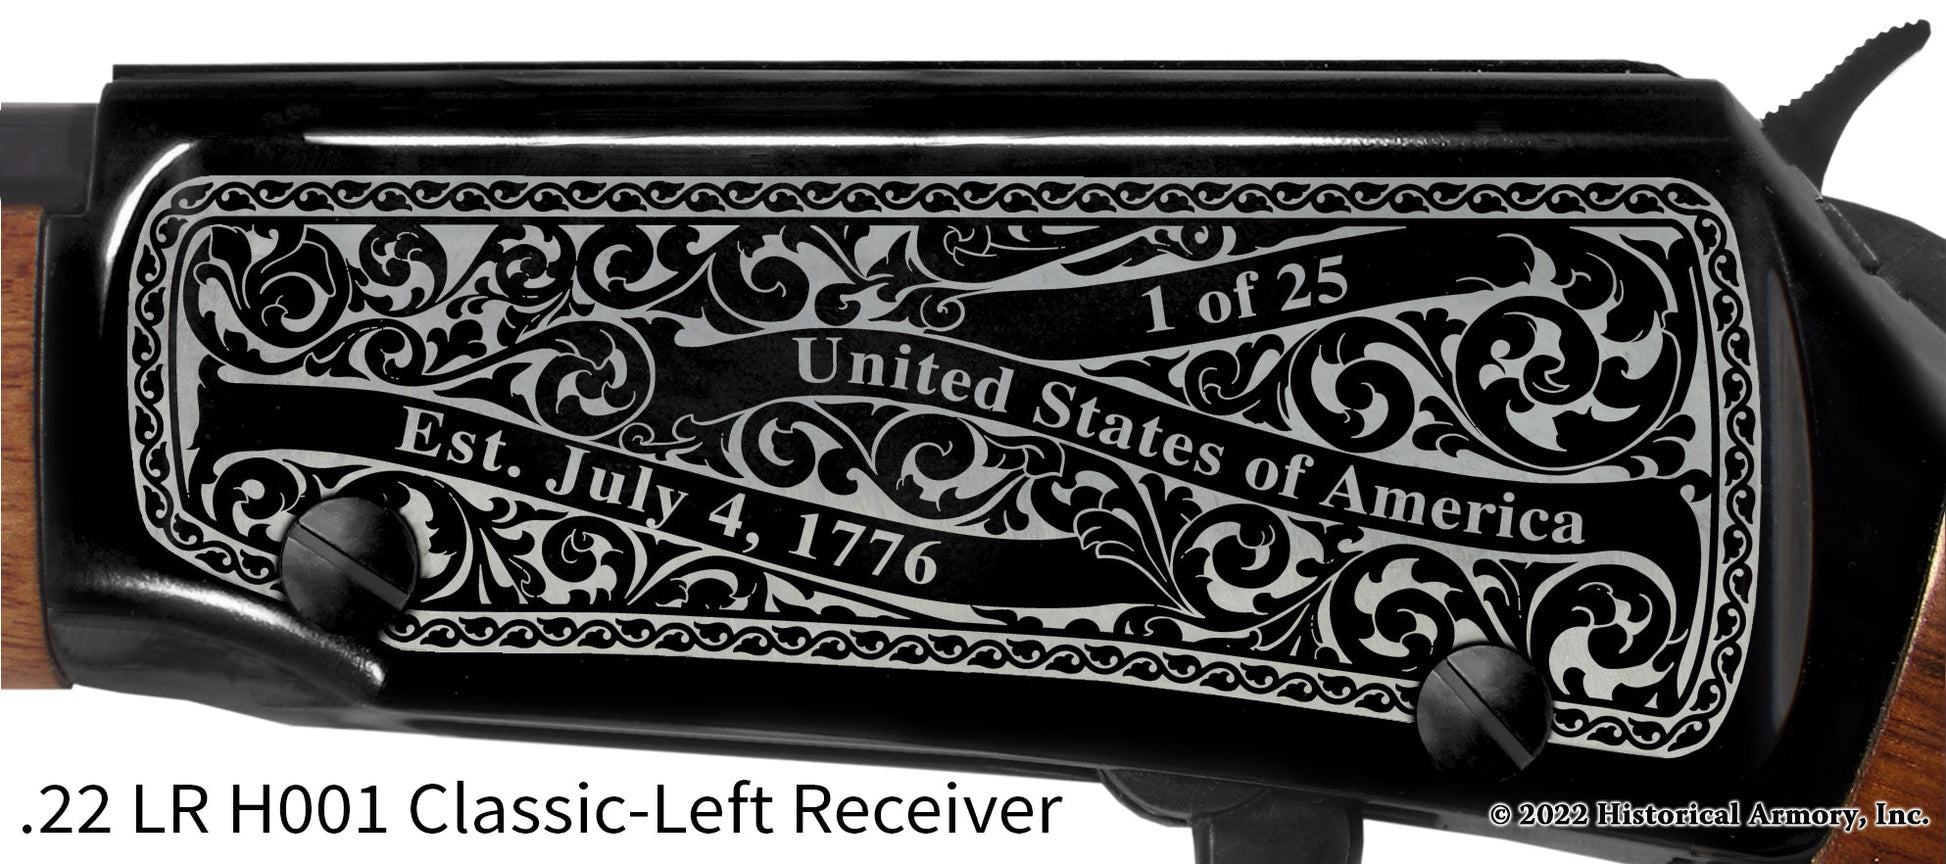 Crook County Oregon Engraved Henry H001 Rifle